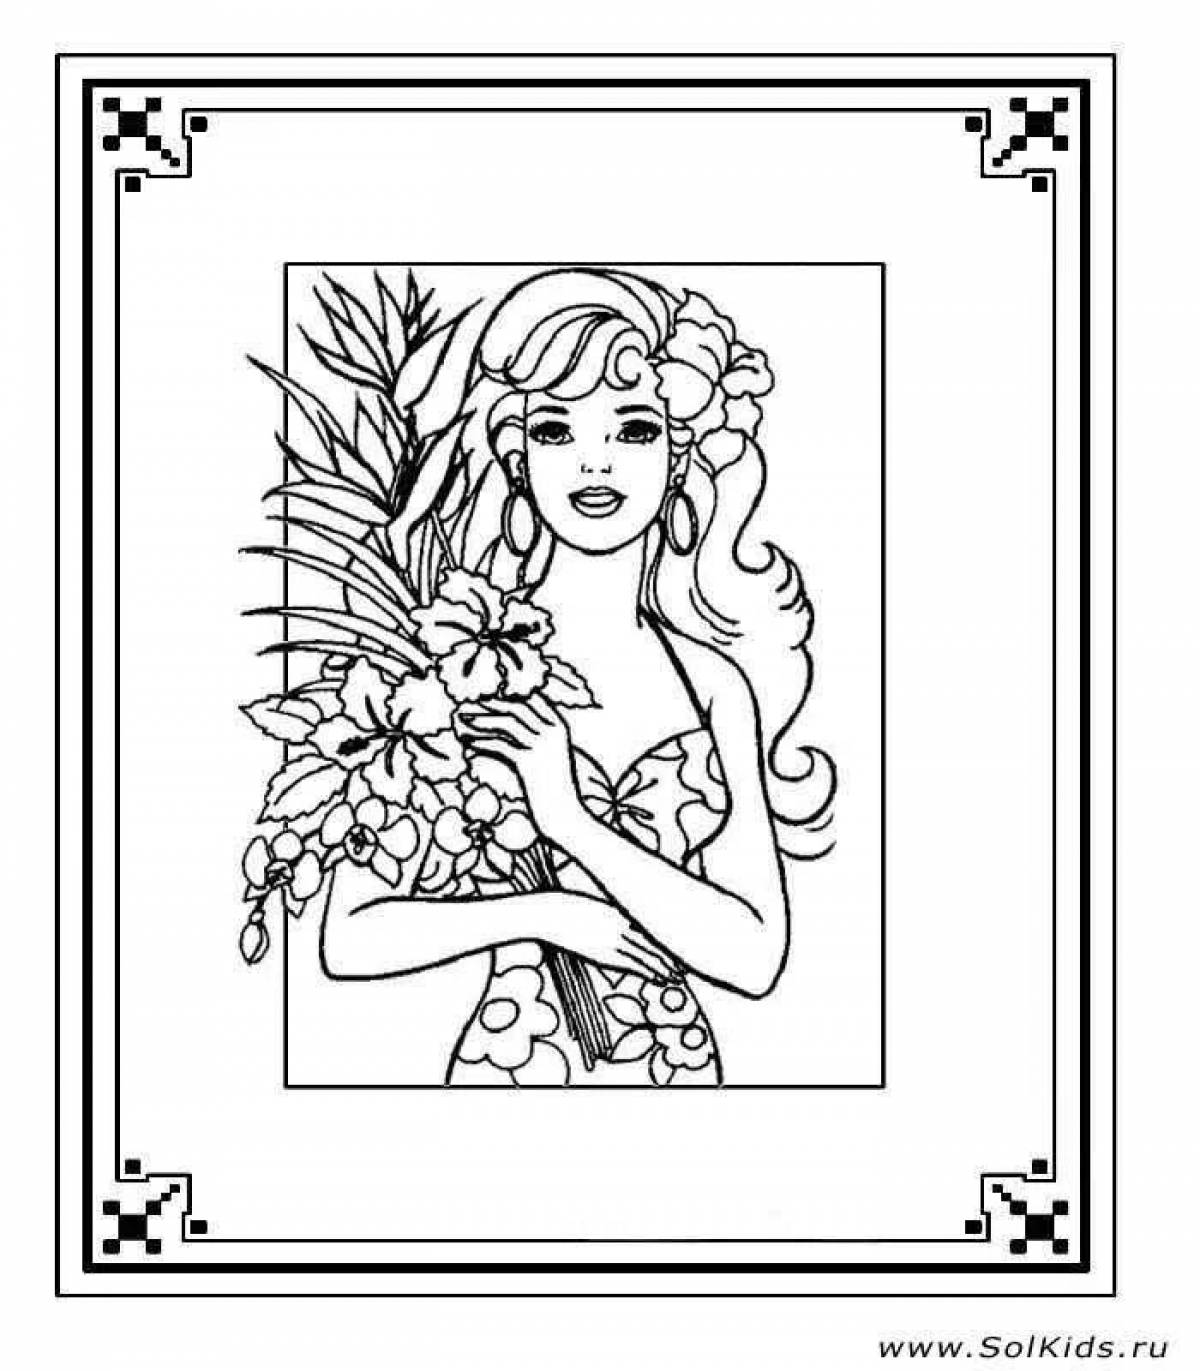 Adorable coloring book for girls 20 years old